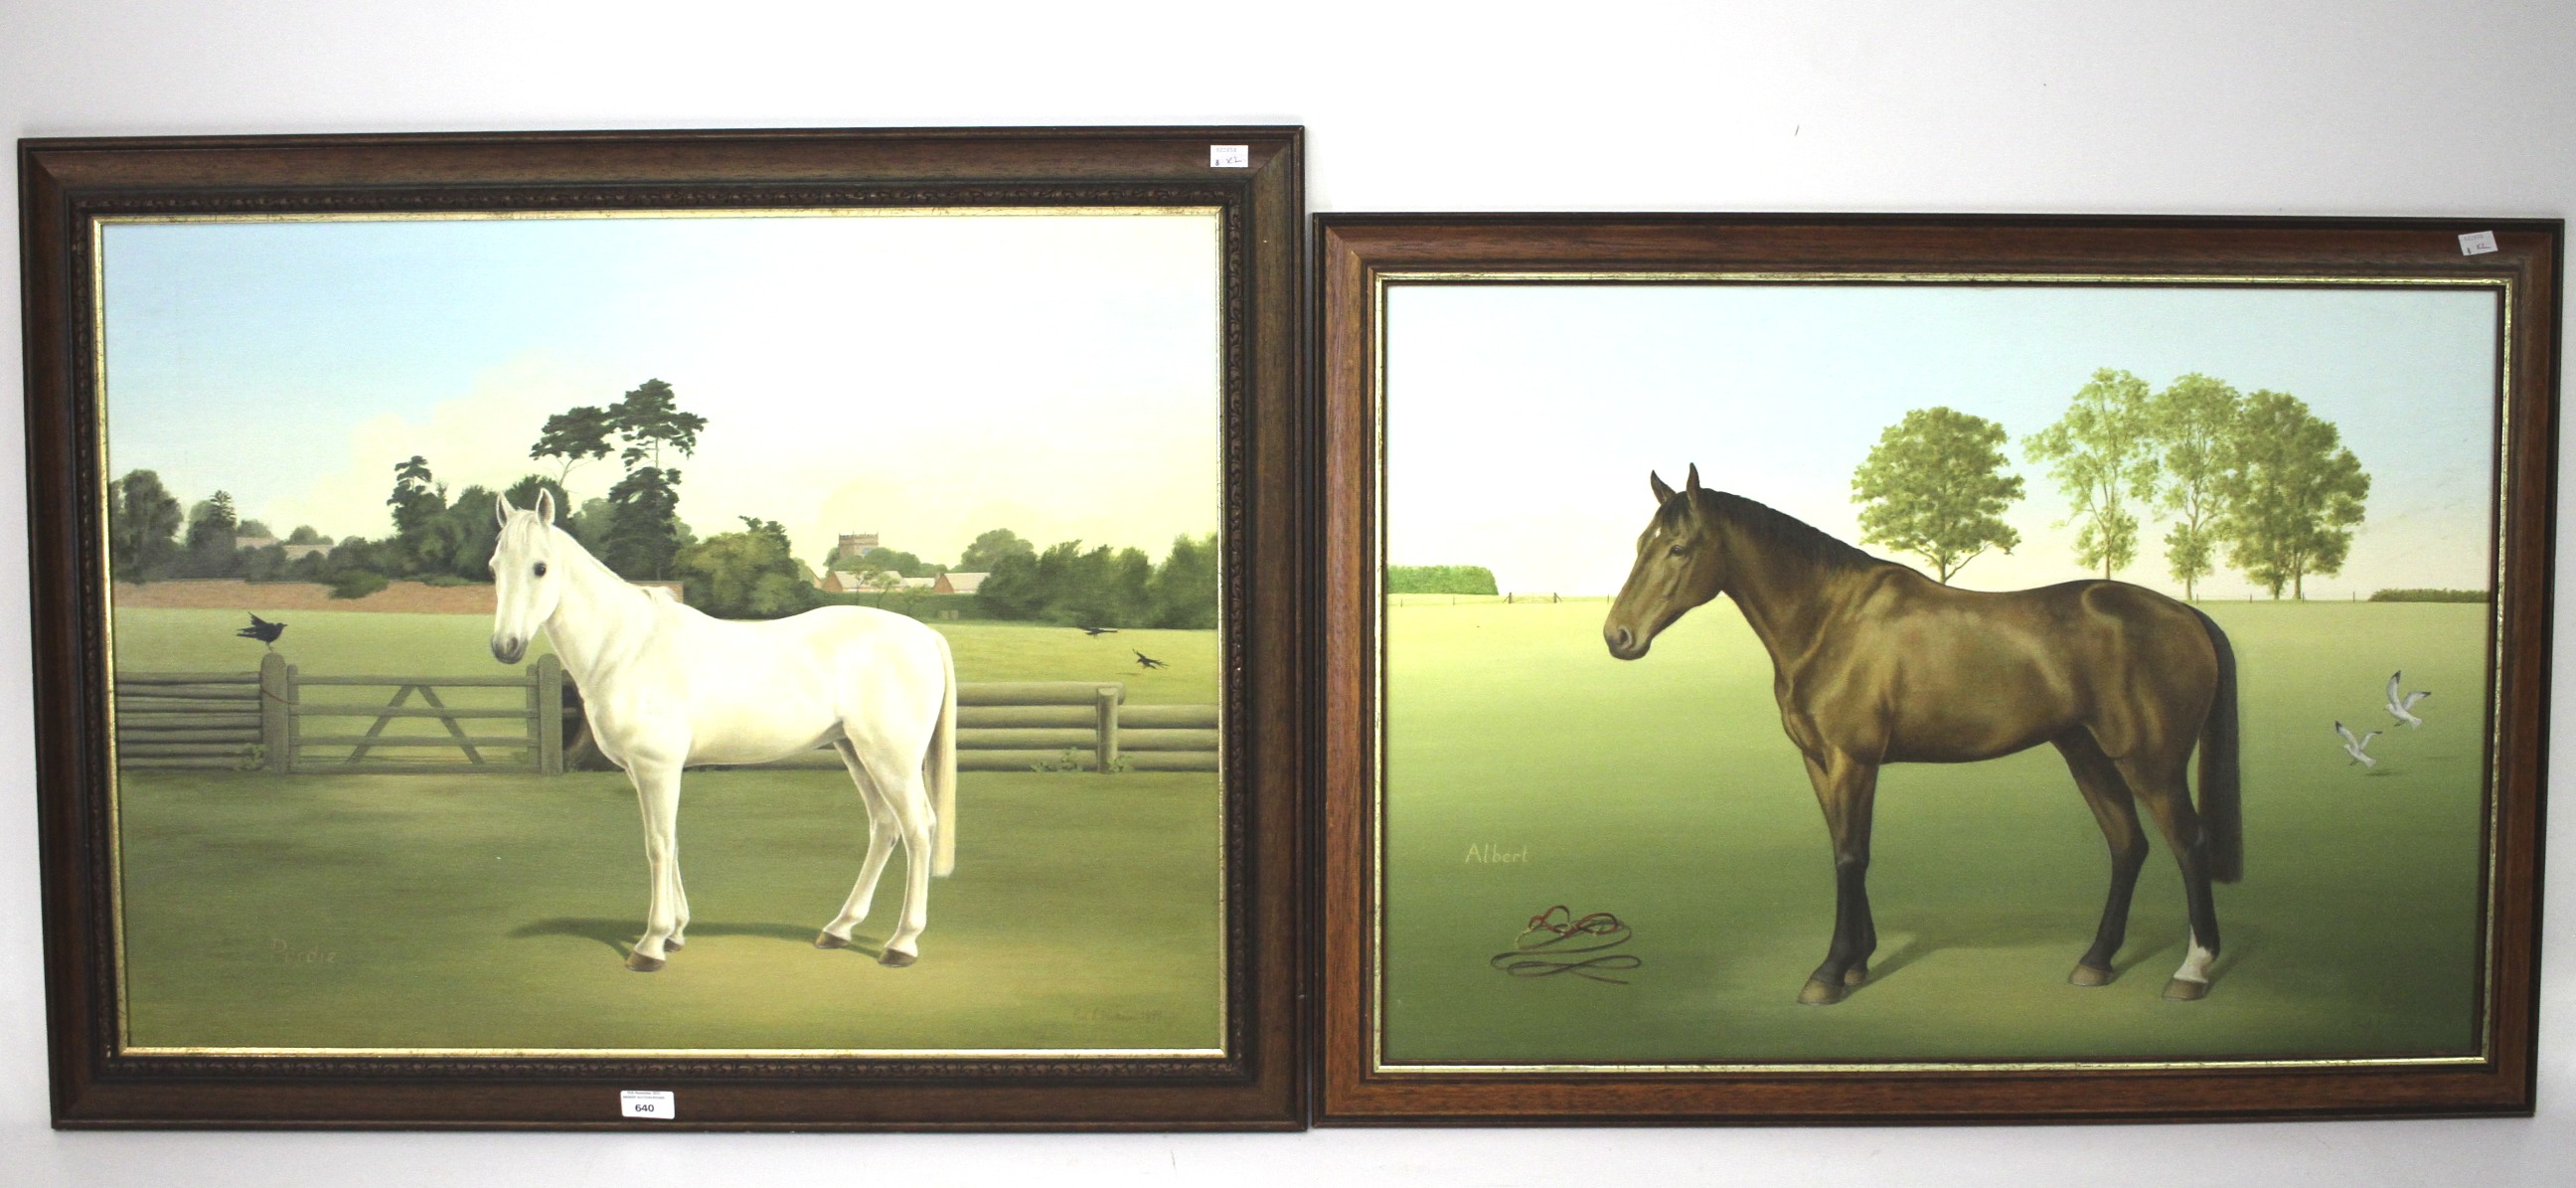 Two large equestrian oil on boards by Paul W Workman. Titled Purdie and Albert, dated 2004 and 1999.